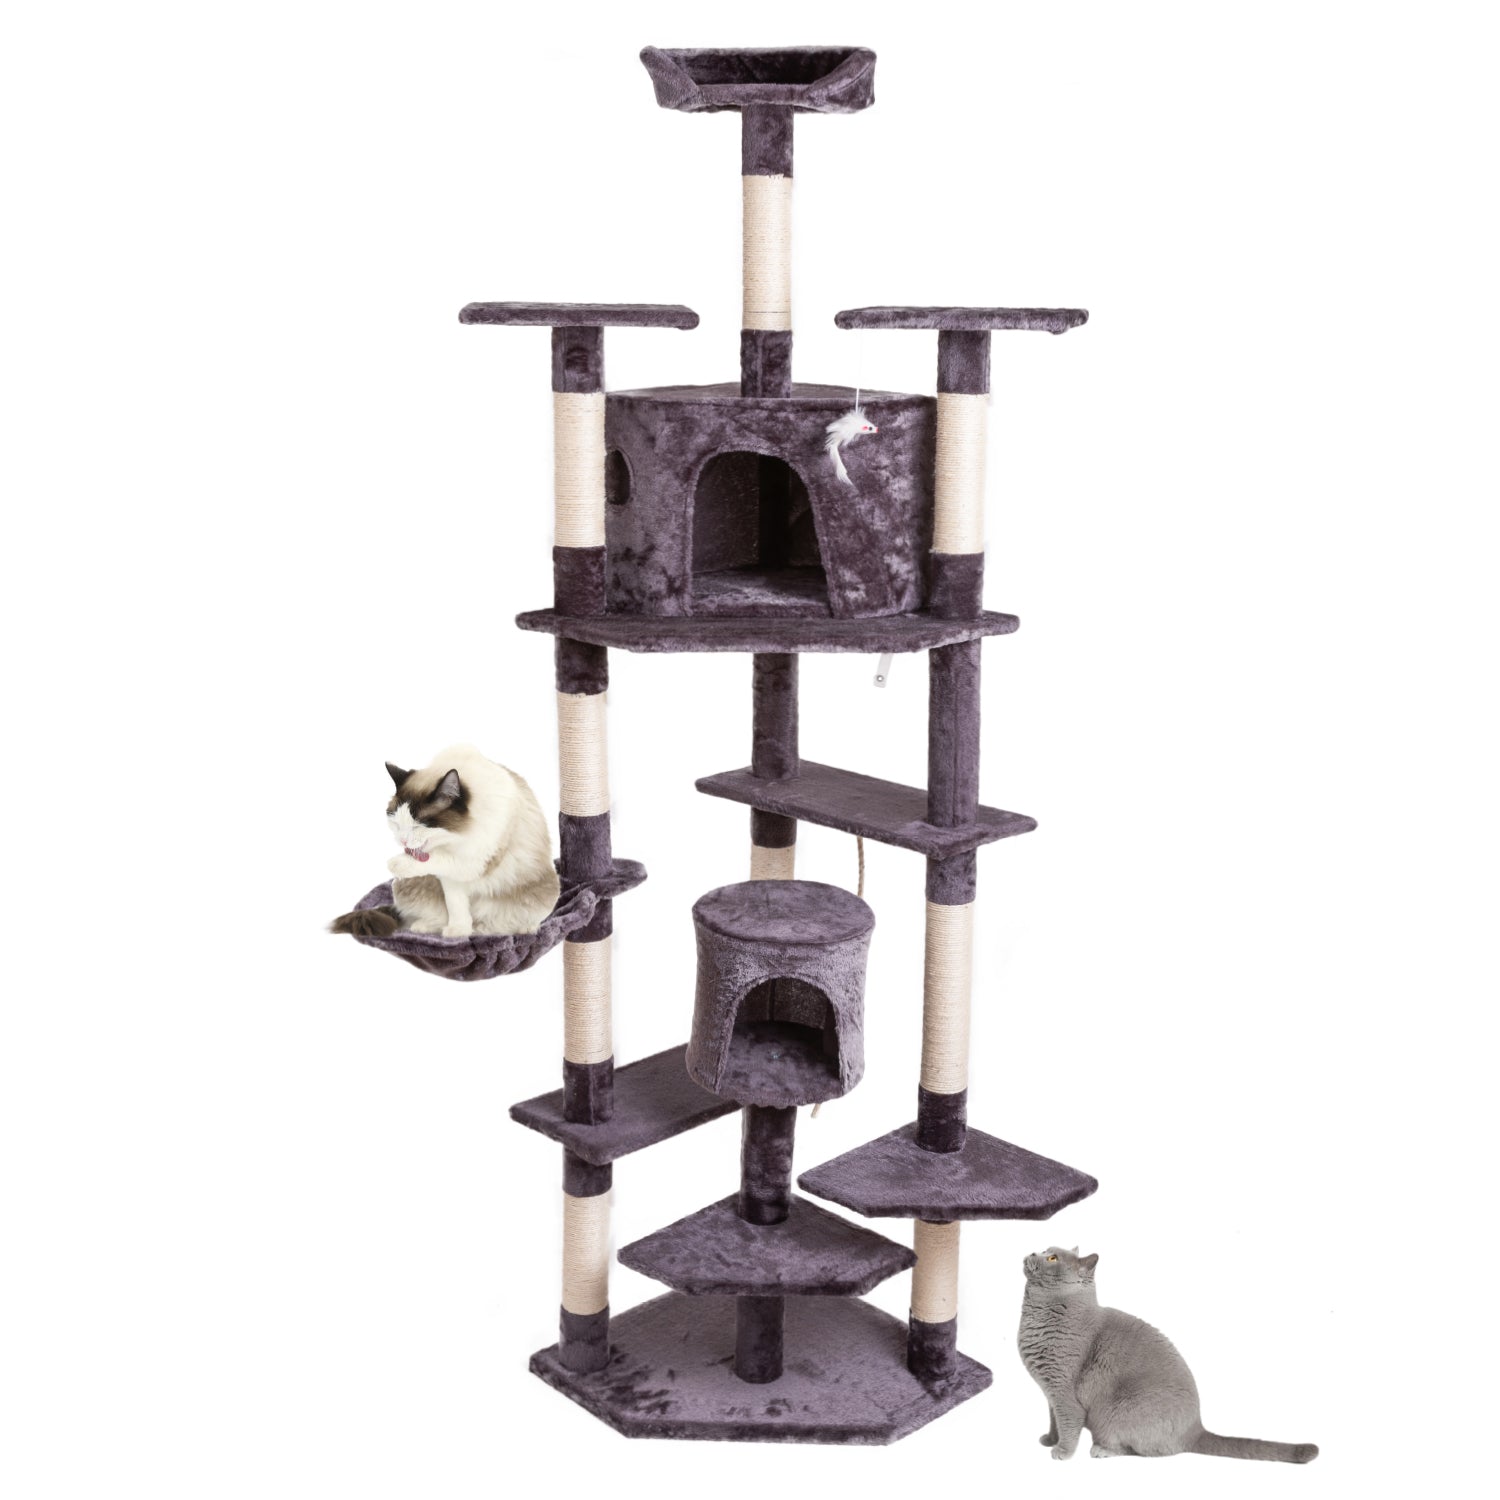 Leafy Paddy 52 Inches Cat Tree,Large Cat Tower,Multi-Level Cat Tree Stand House Furniture Kittens Activity Tower with Scratching Posts Kitty Pet Play House Brown